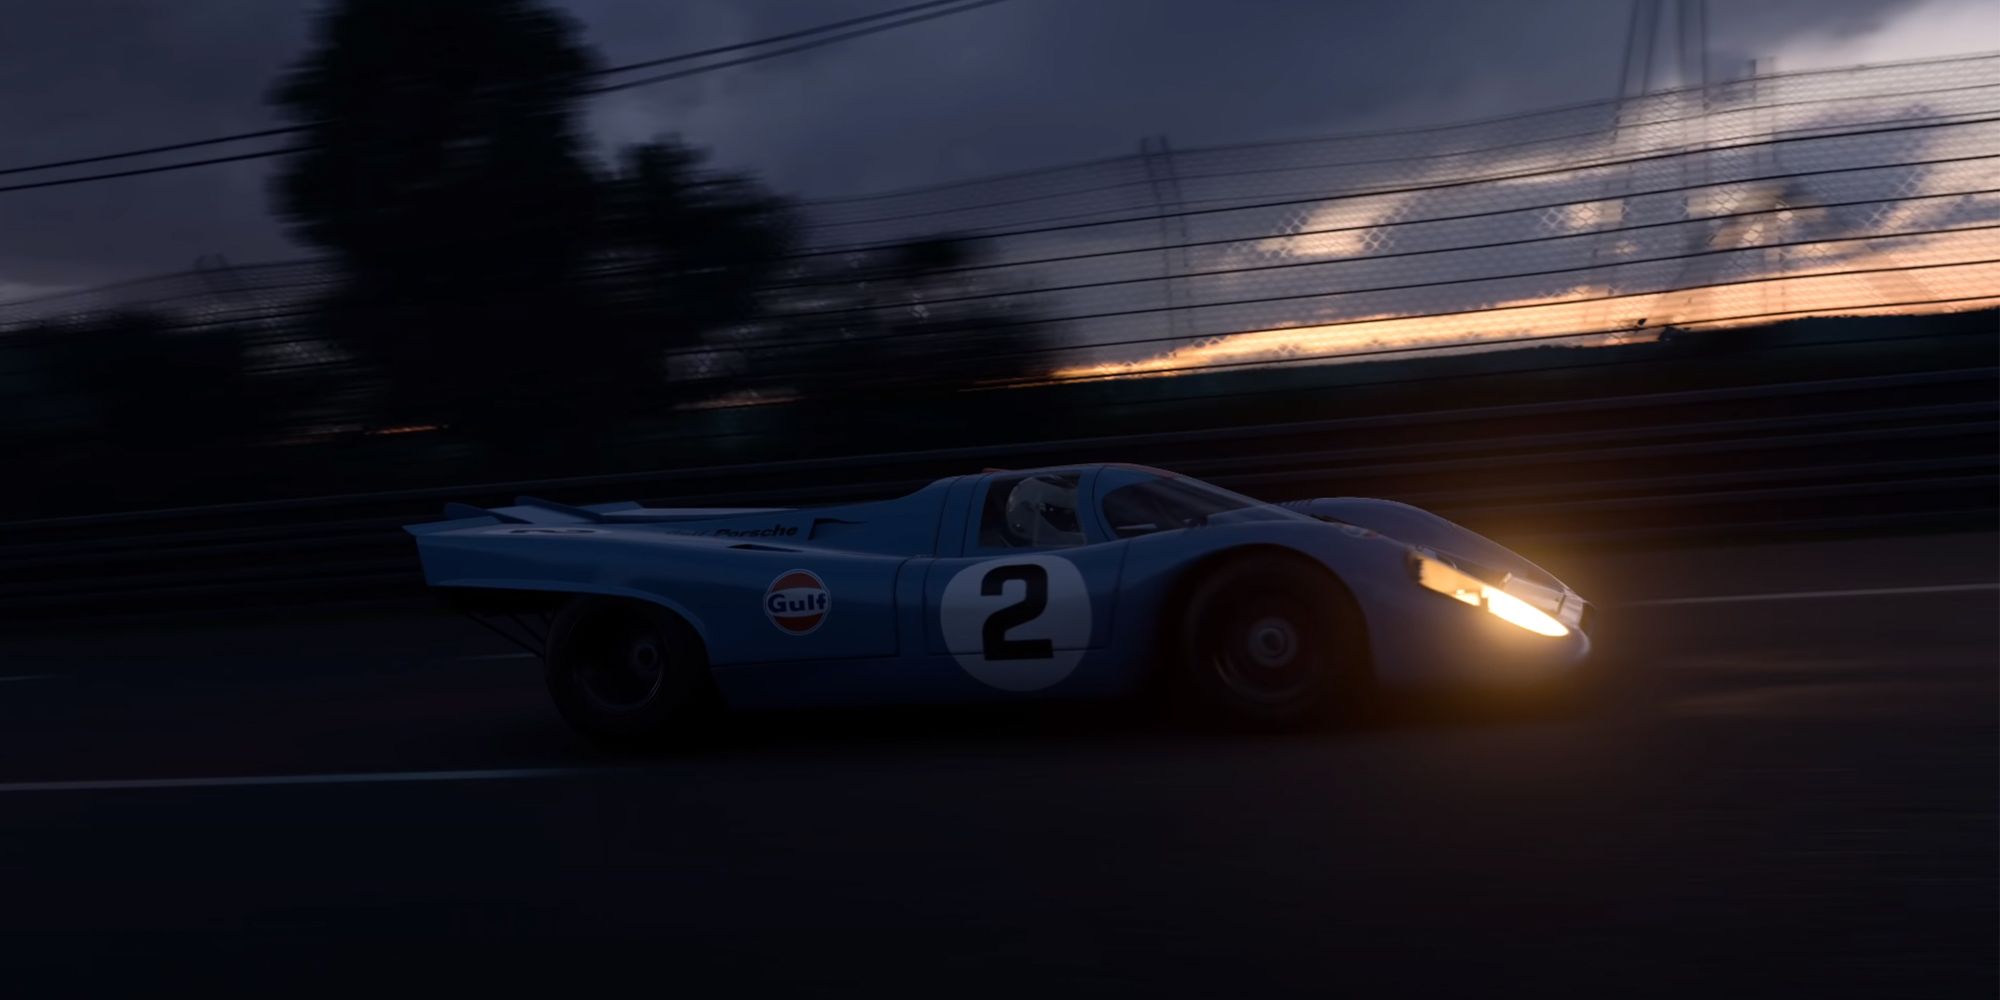 Gran Turismo 7 Trailer Boasts the Game Has Over 400 Cars